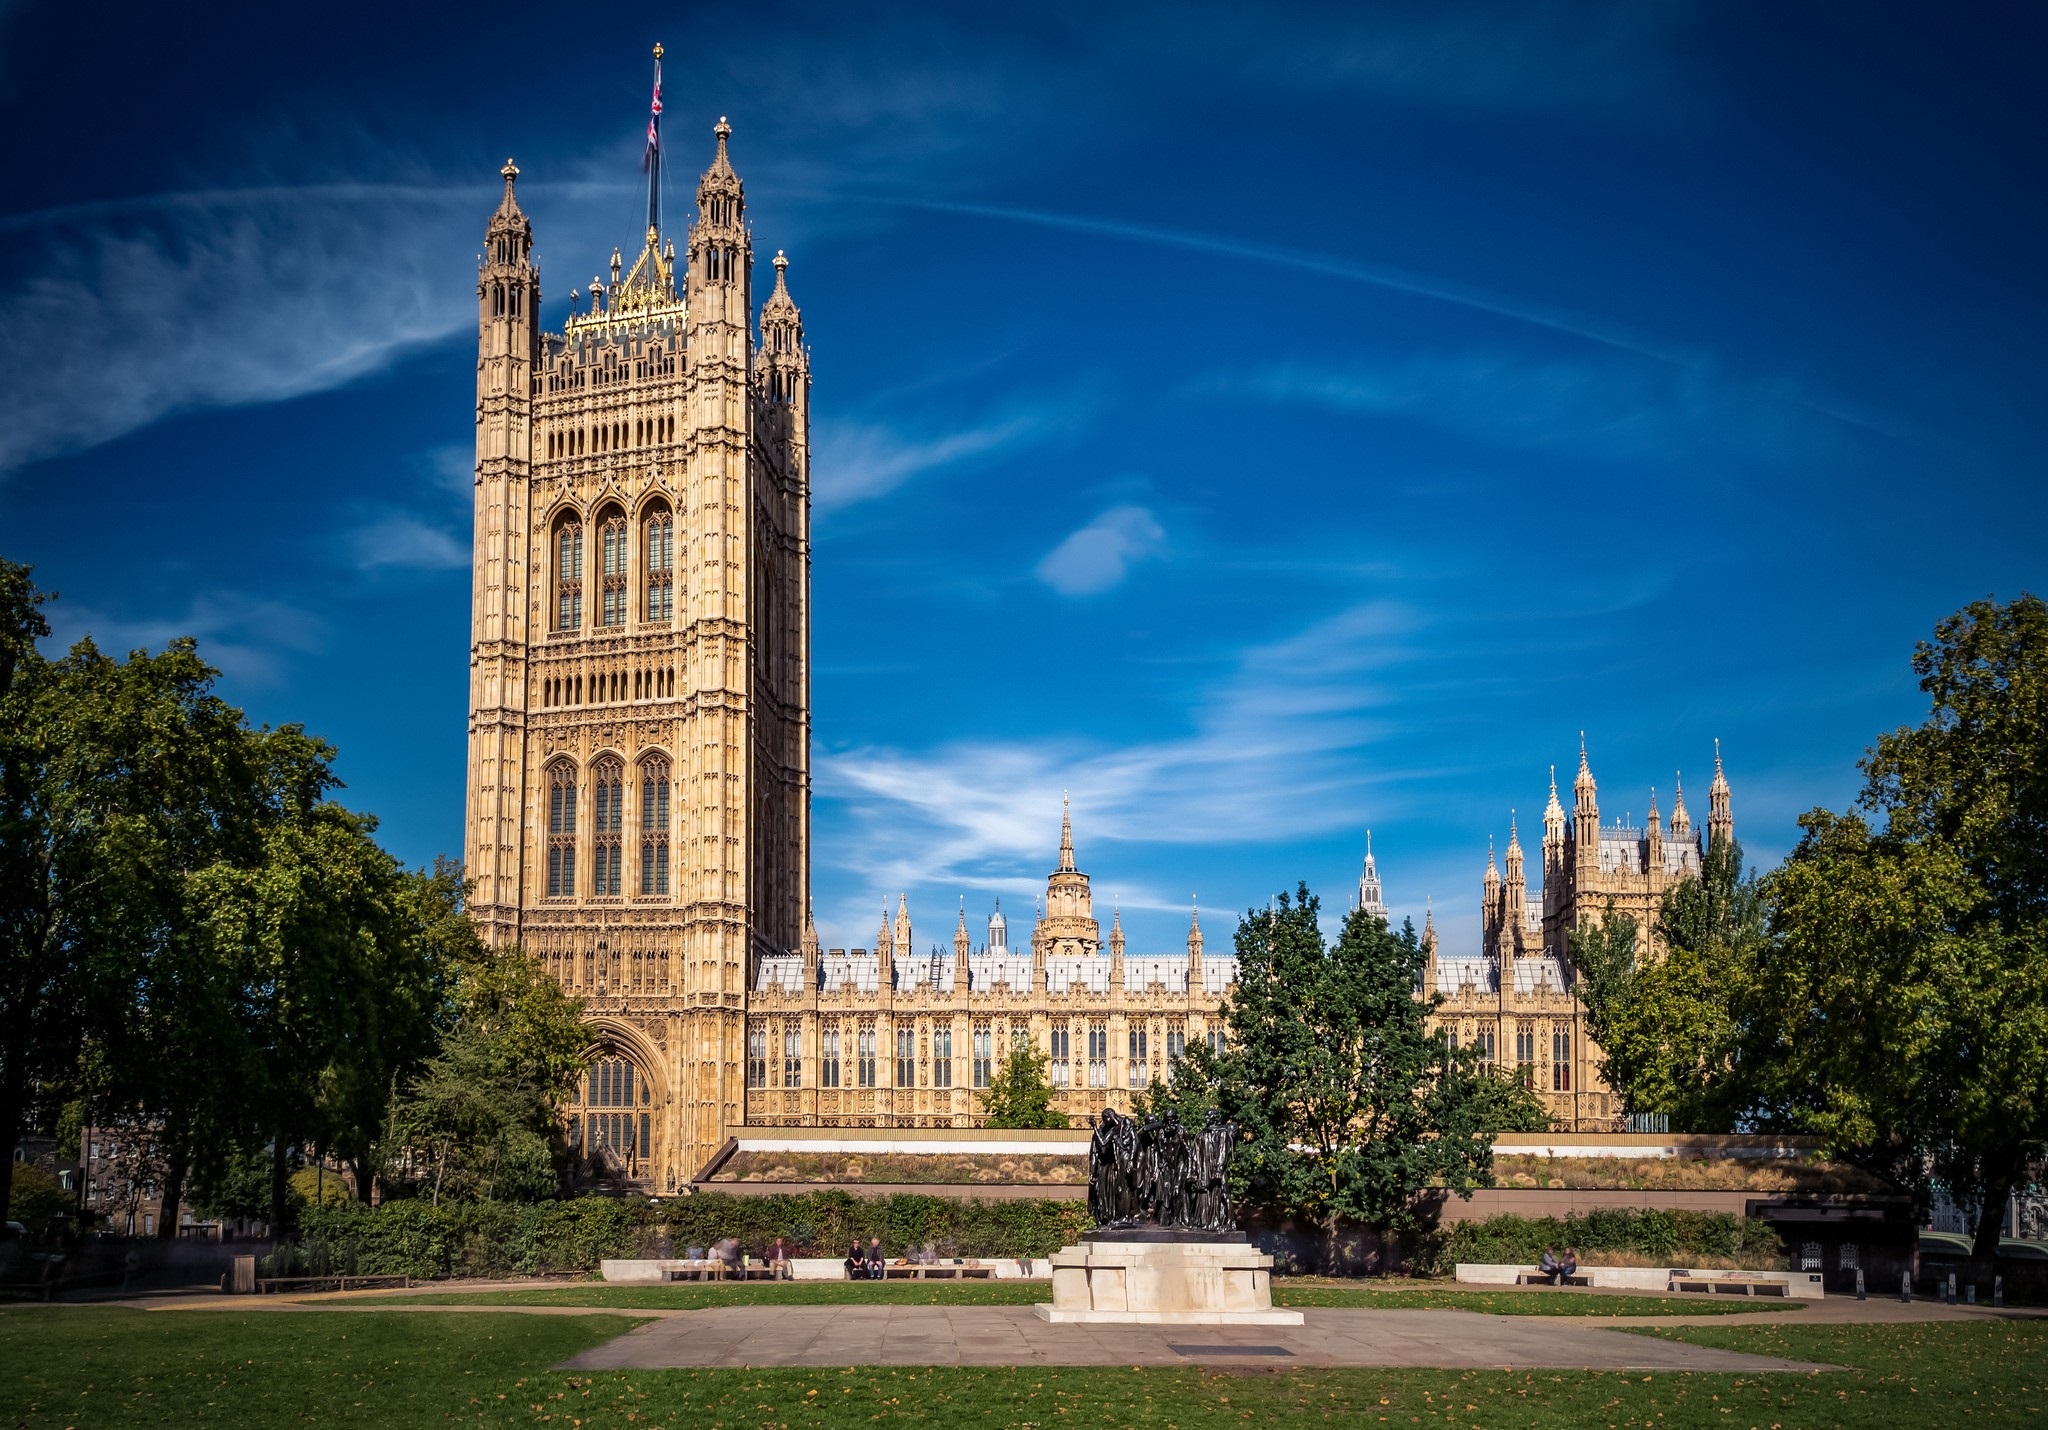 palace of westminster, man made, architecture, united kingdom, palaces